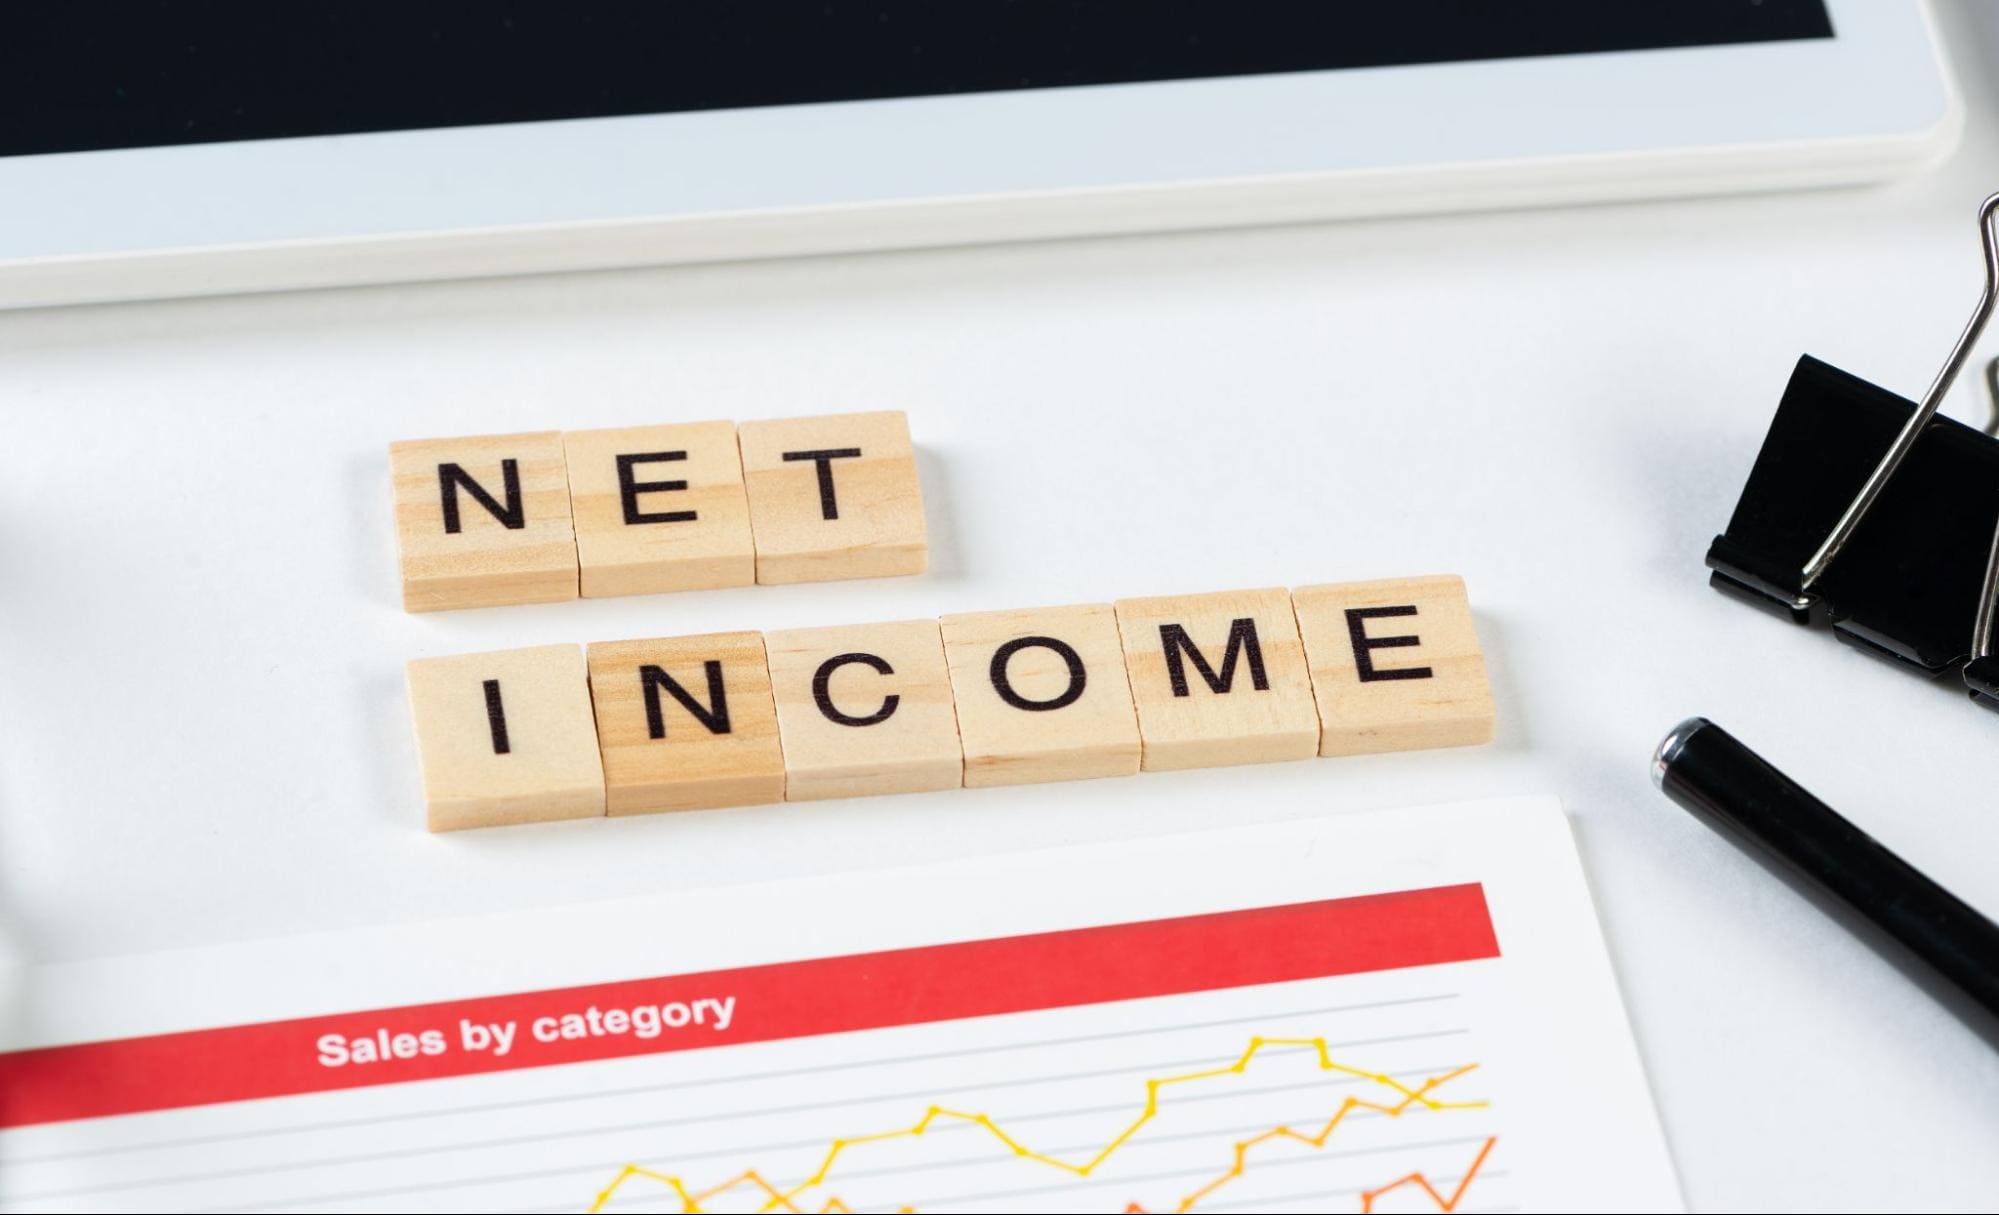 What is Net Income? Influencing factors, meaning, and calculation of Net Income